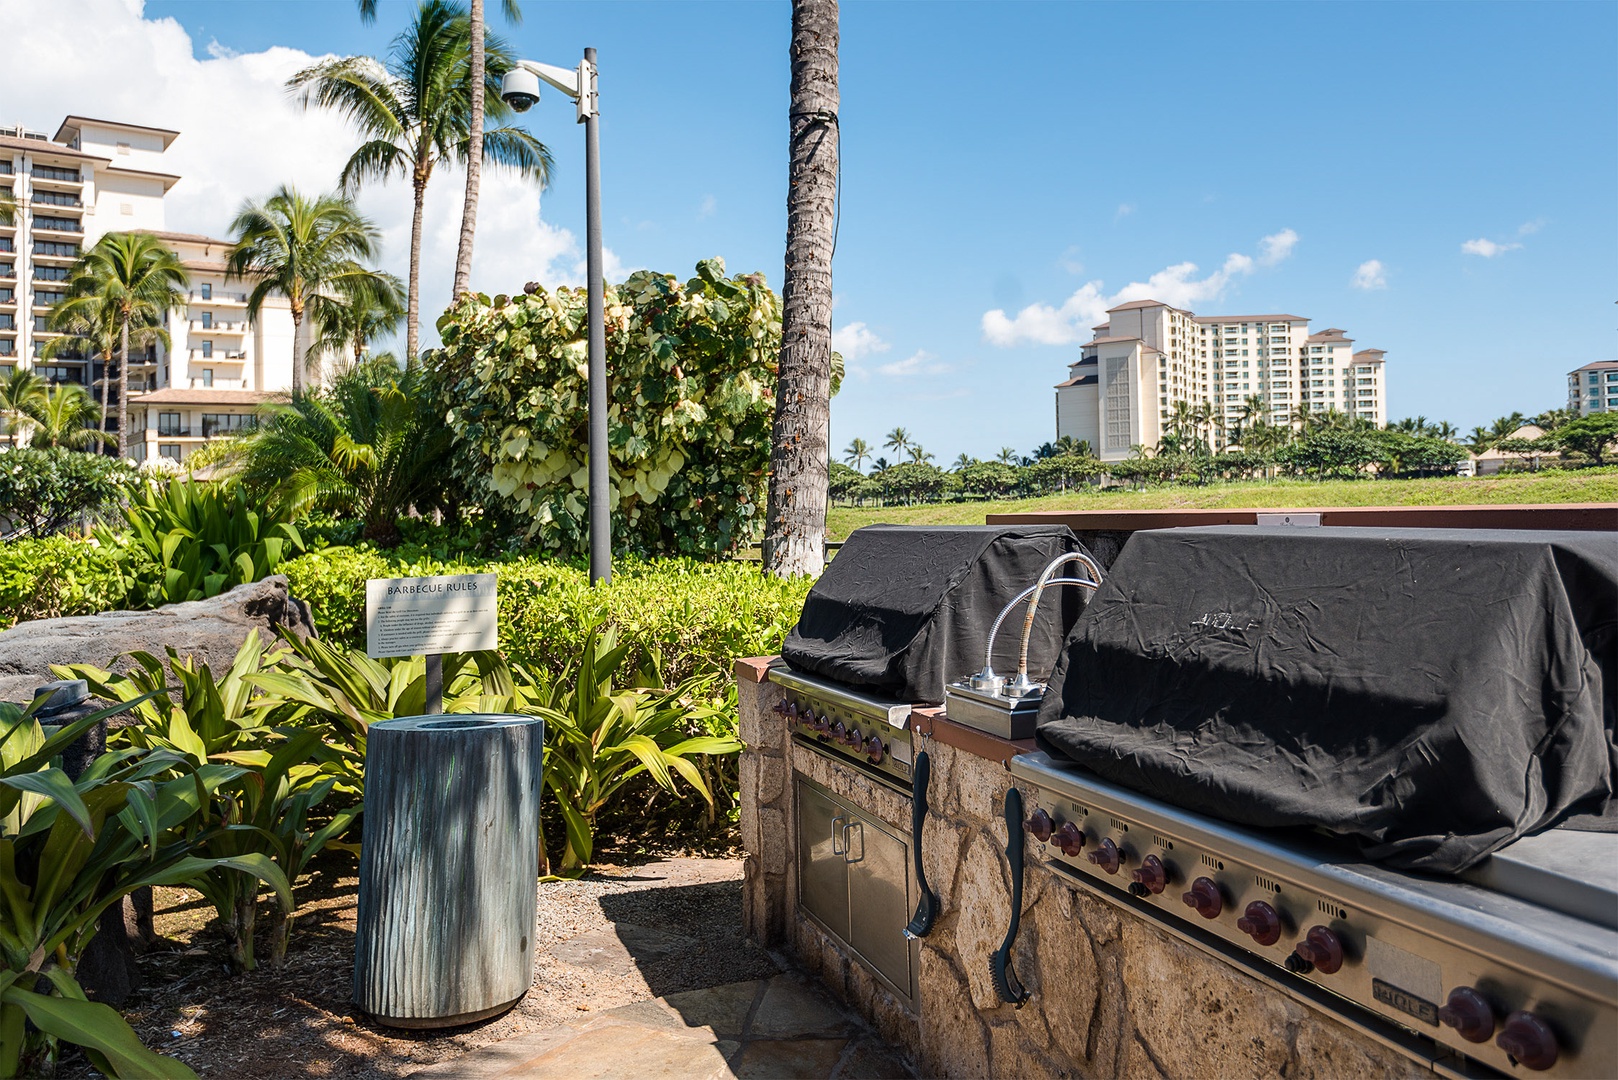 Kapolei Vacation Rentals, Ko Olina Beach Villas B506 - The resort features BBQ grills for happy days on the island.